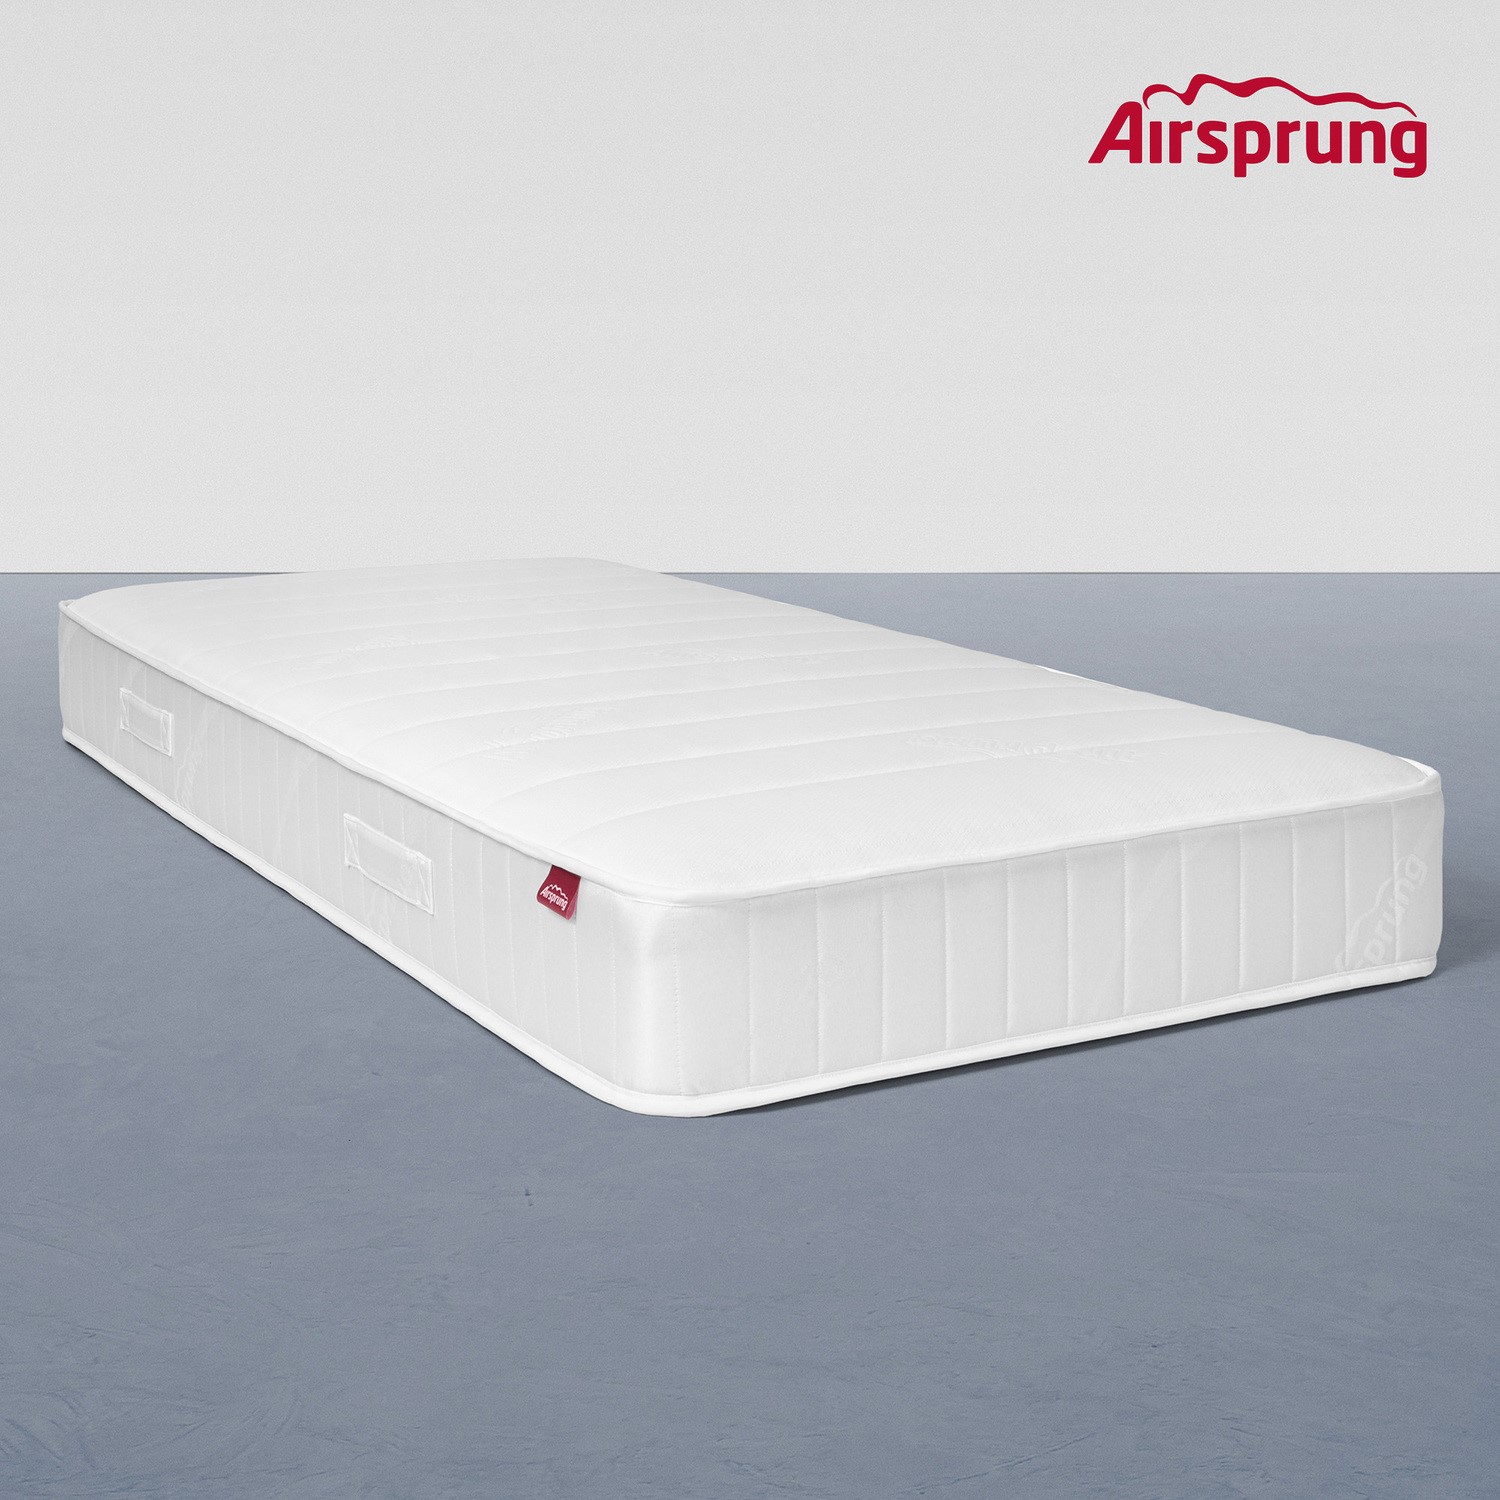 Read more about Single 1000 pocket sprung rolled recycled fibre mattress airsprung